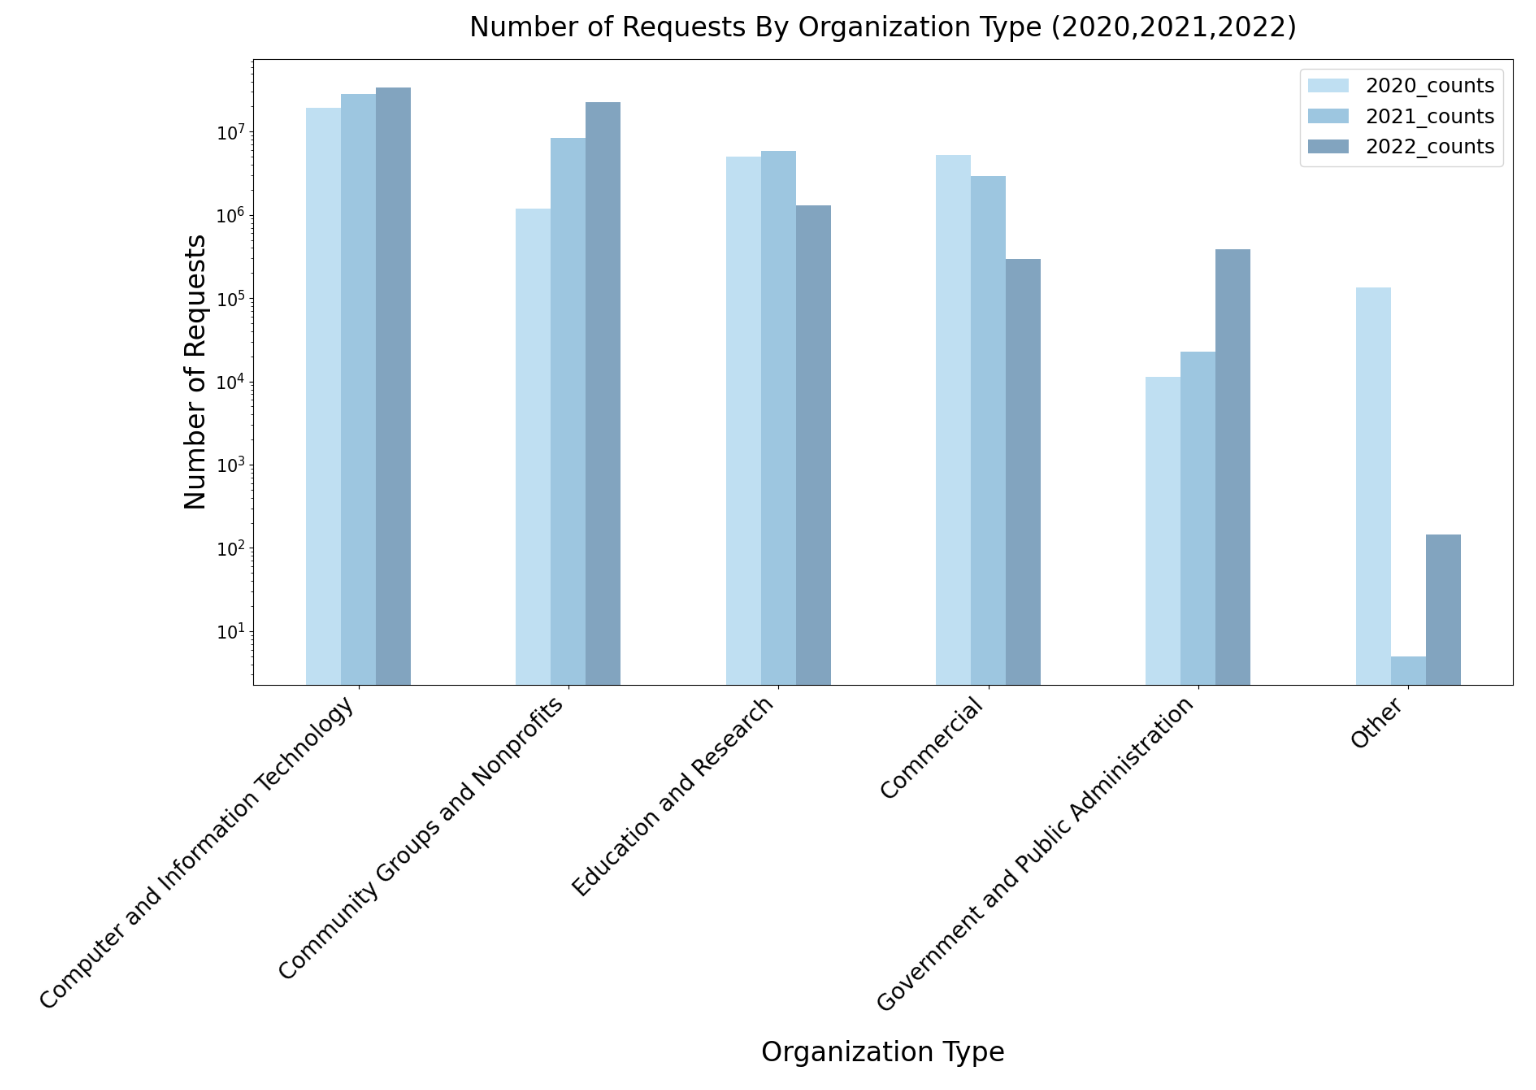 BGPstream requests received annually aggregated by organization type.